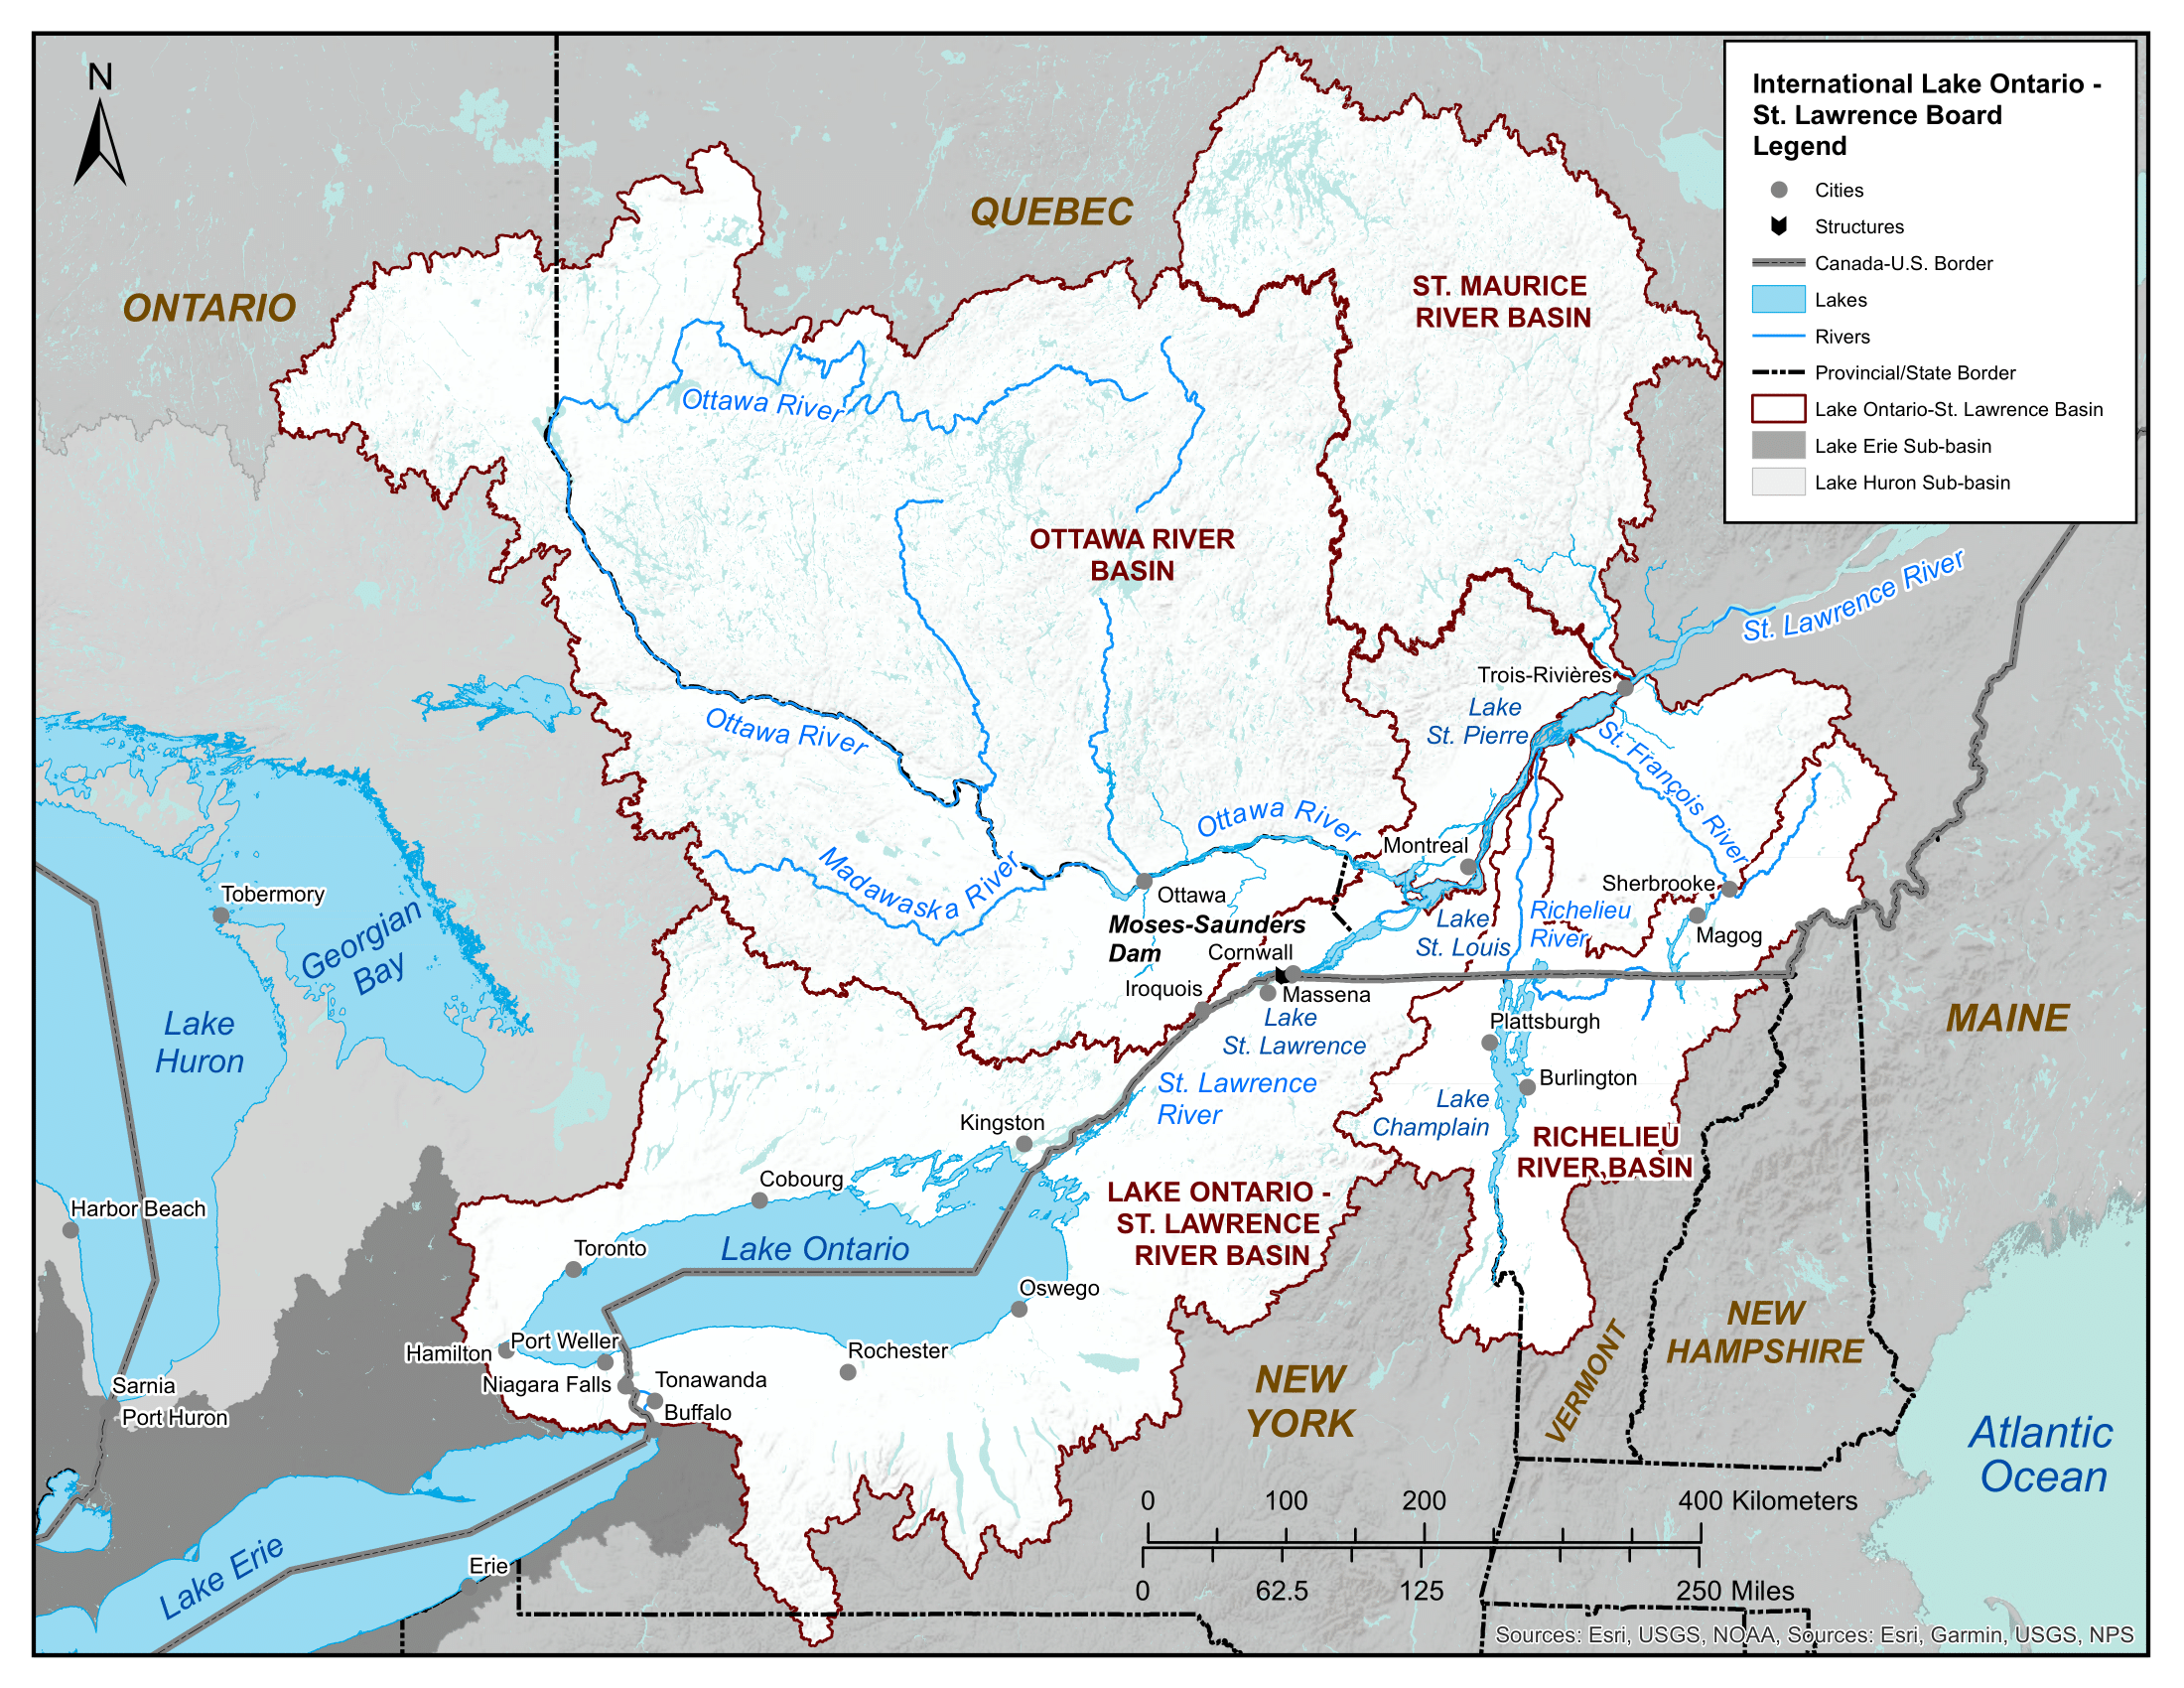 ILOSLRB - Lake Ontario and St. Lawrence River basin map